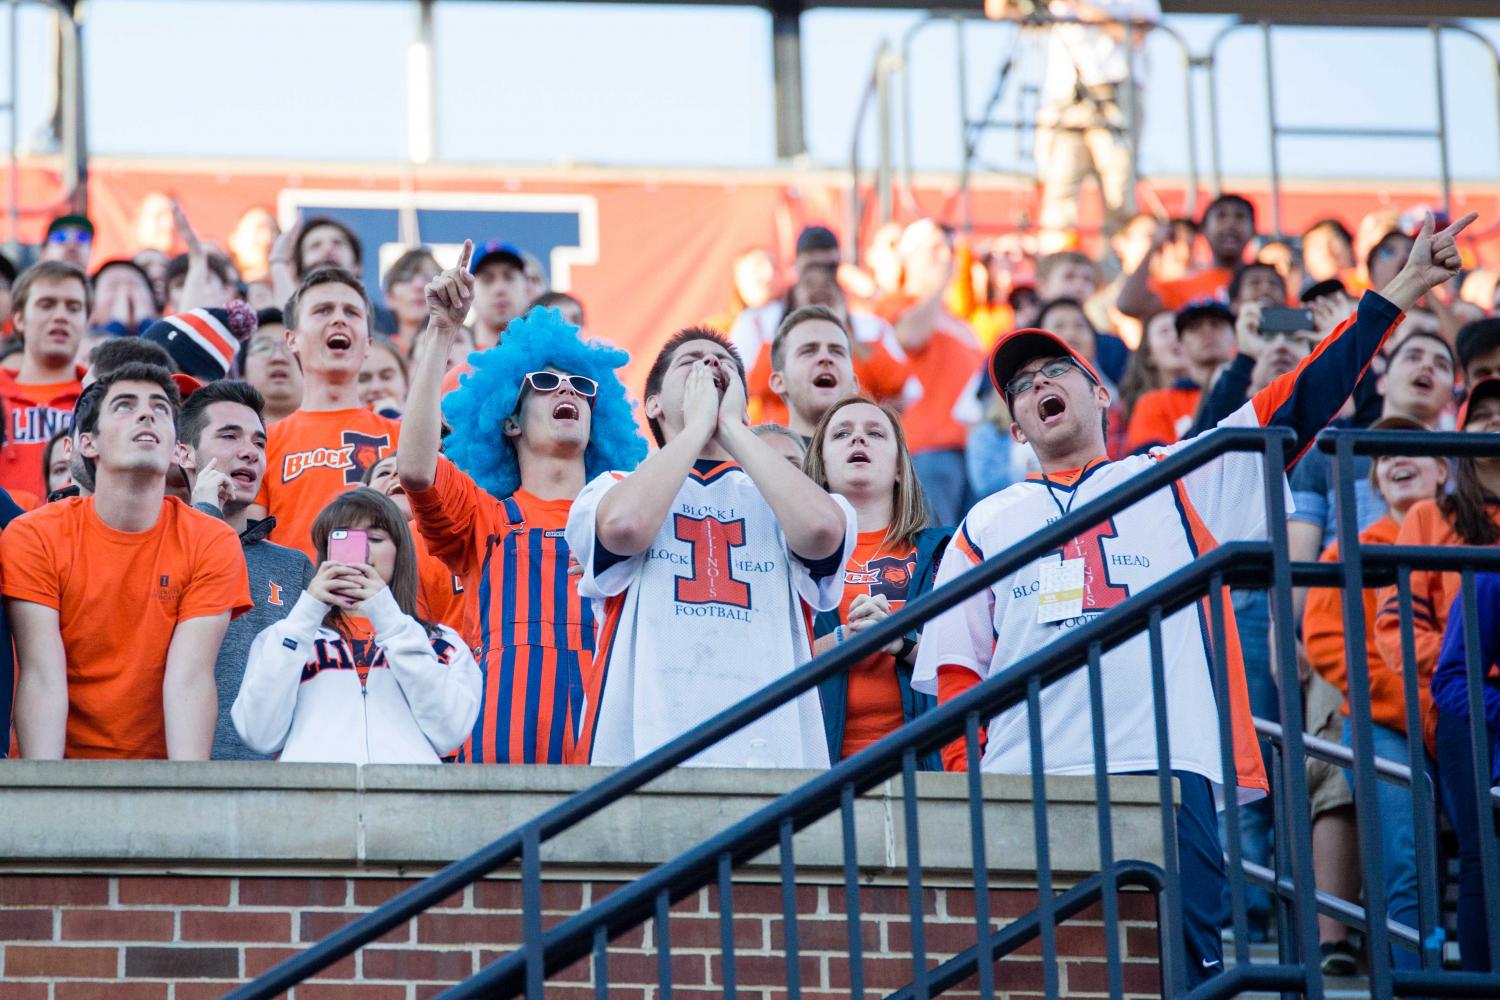 Students in Block I cheer during the football game against Purdeu at Memorial Stadium on Oct. 8, 2016. The University has adopted the block I as its only logo. 